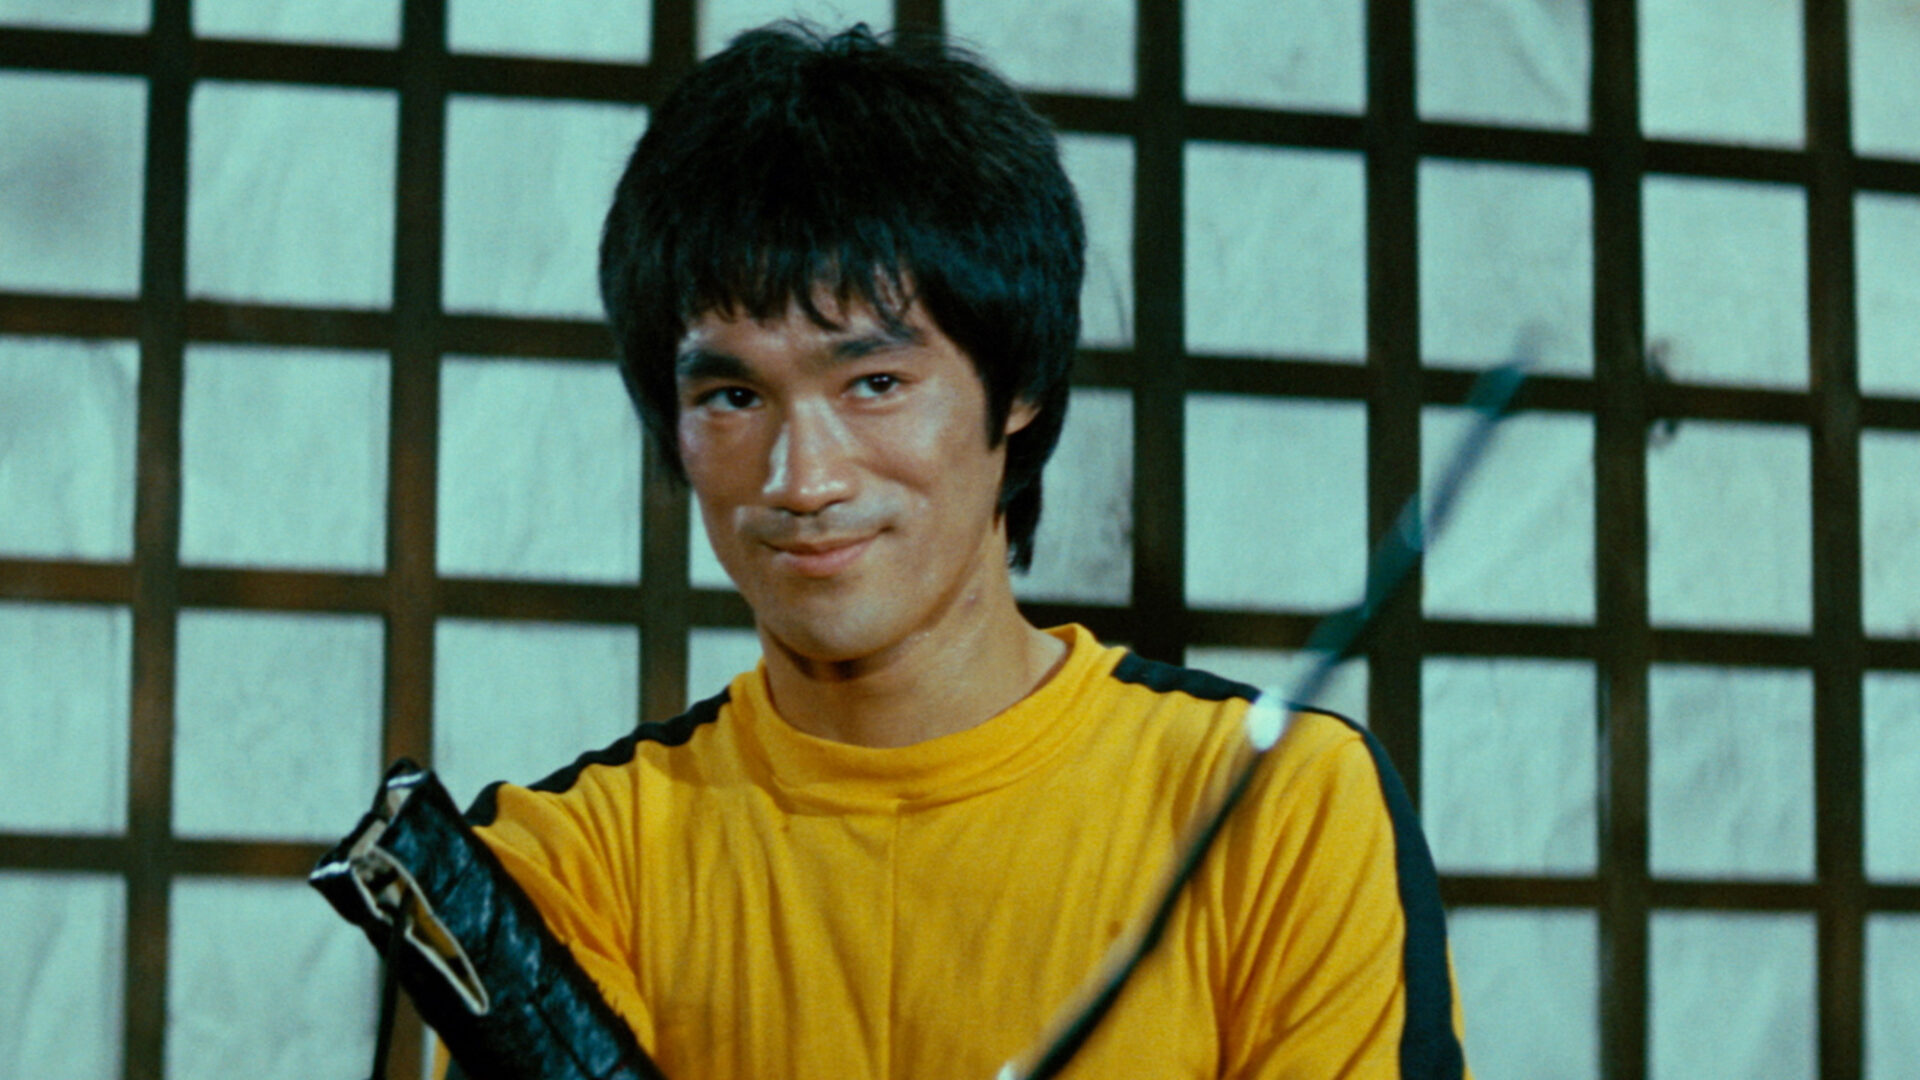 Still image of Bruce Lee from “Game of Death”